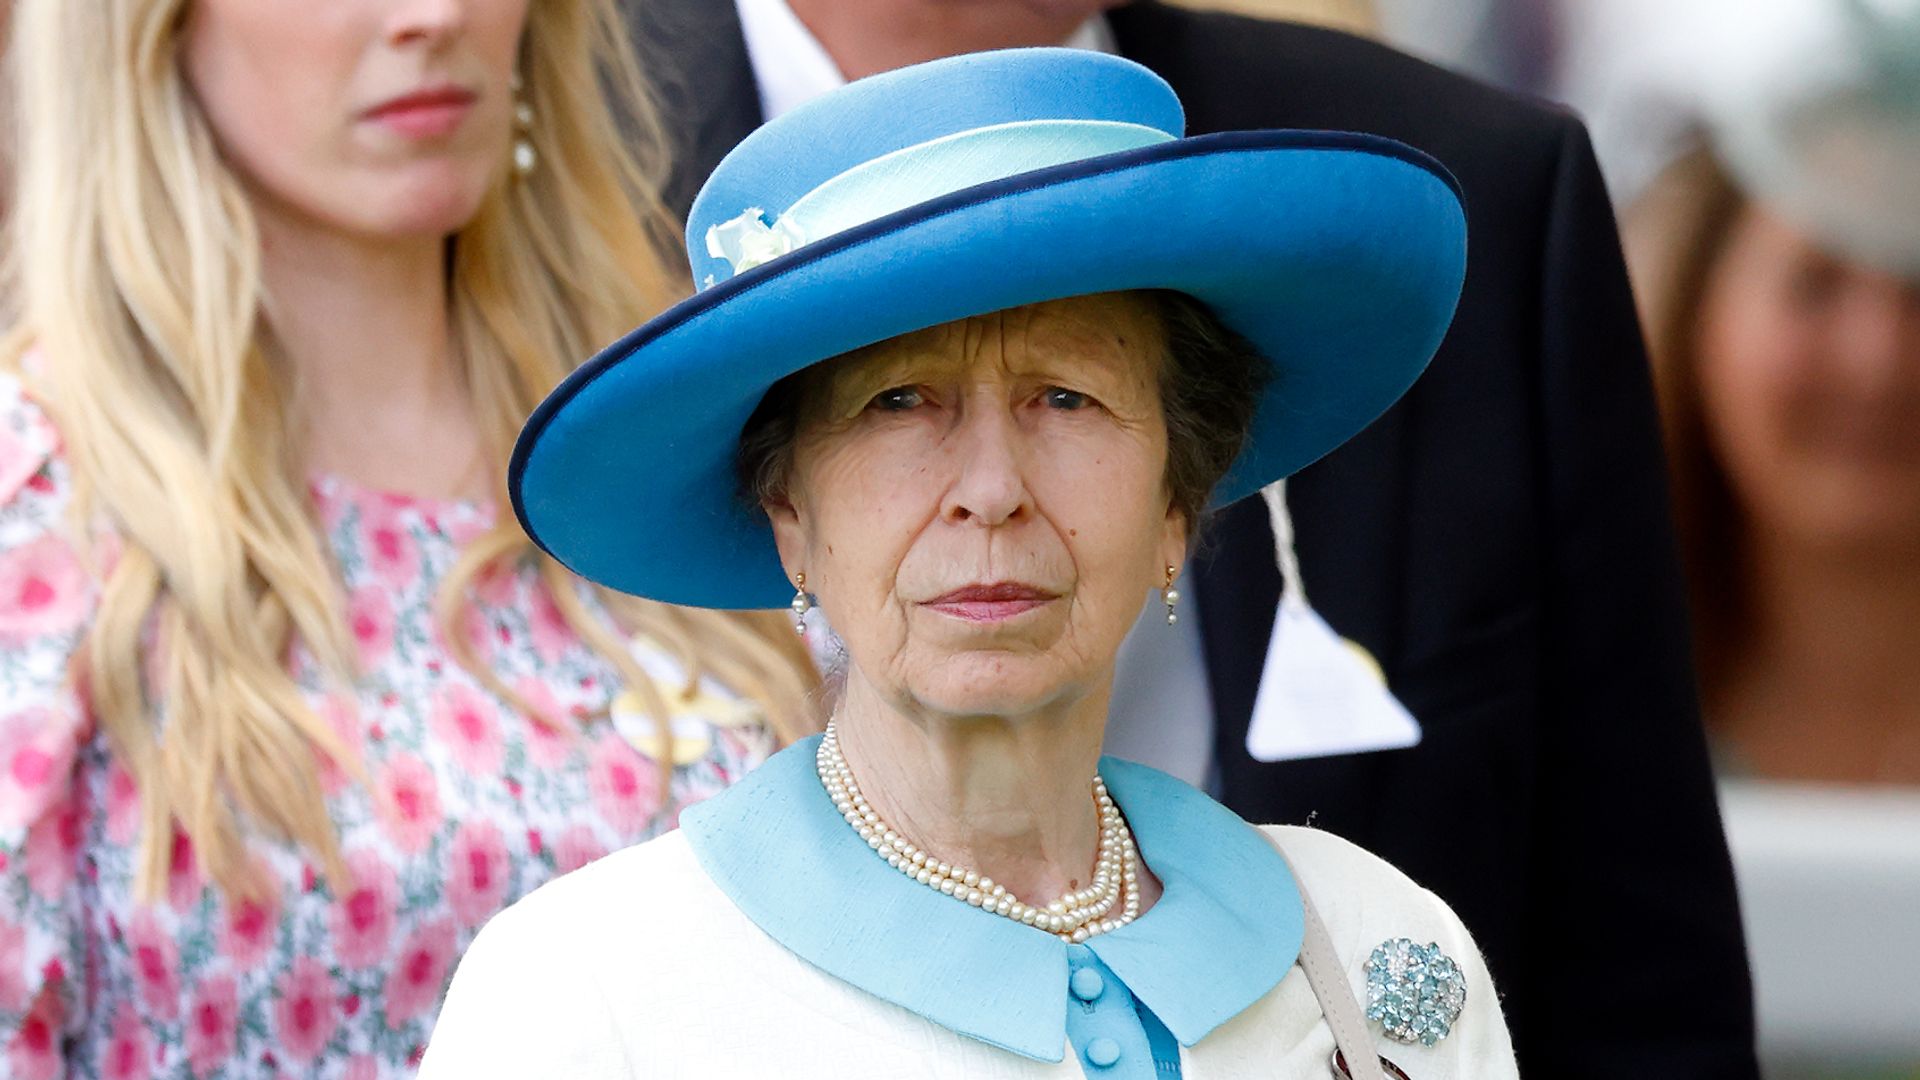 Princess Anne white and blue outfit